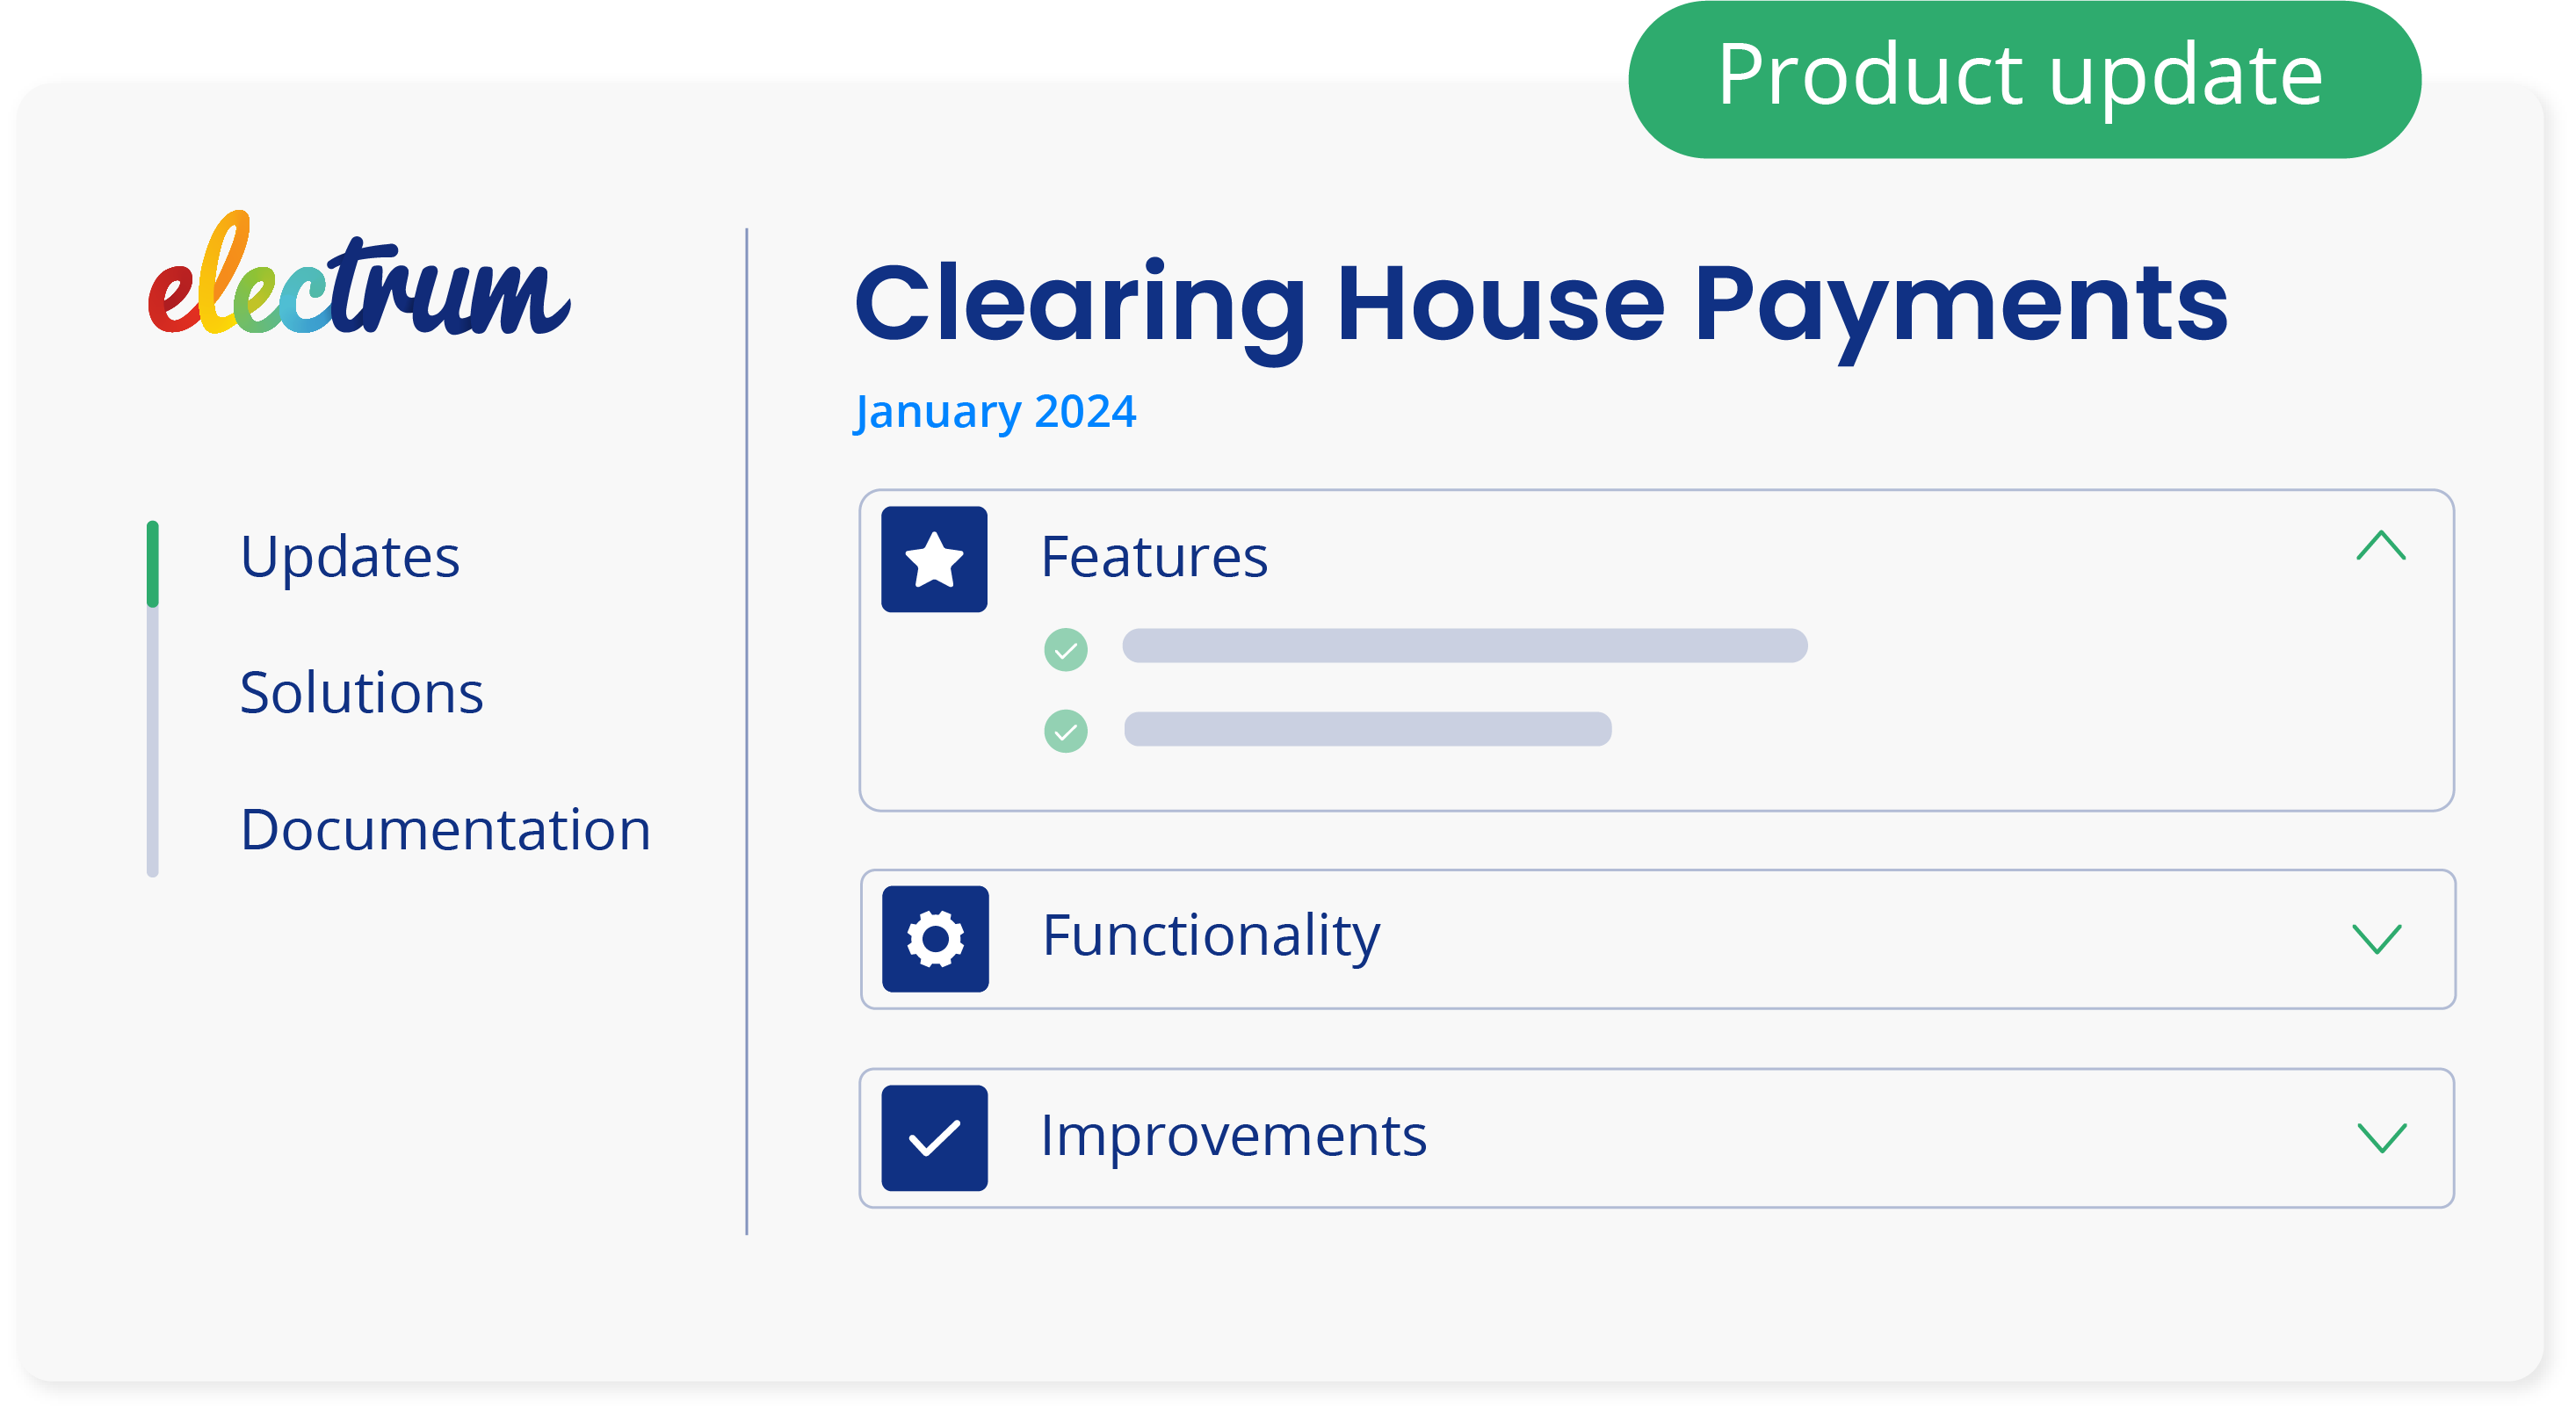 Clearing House Payments Product Image